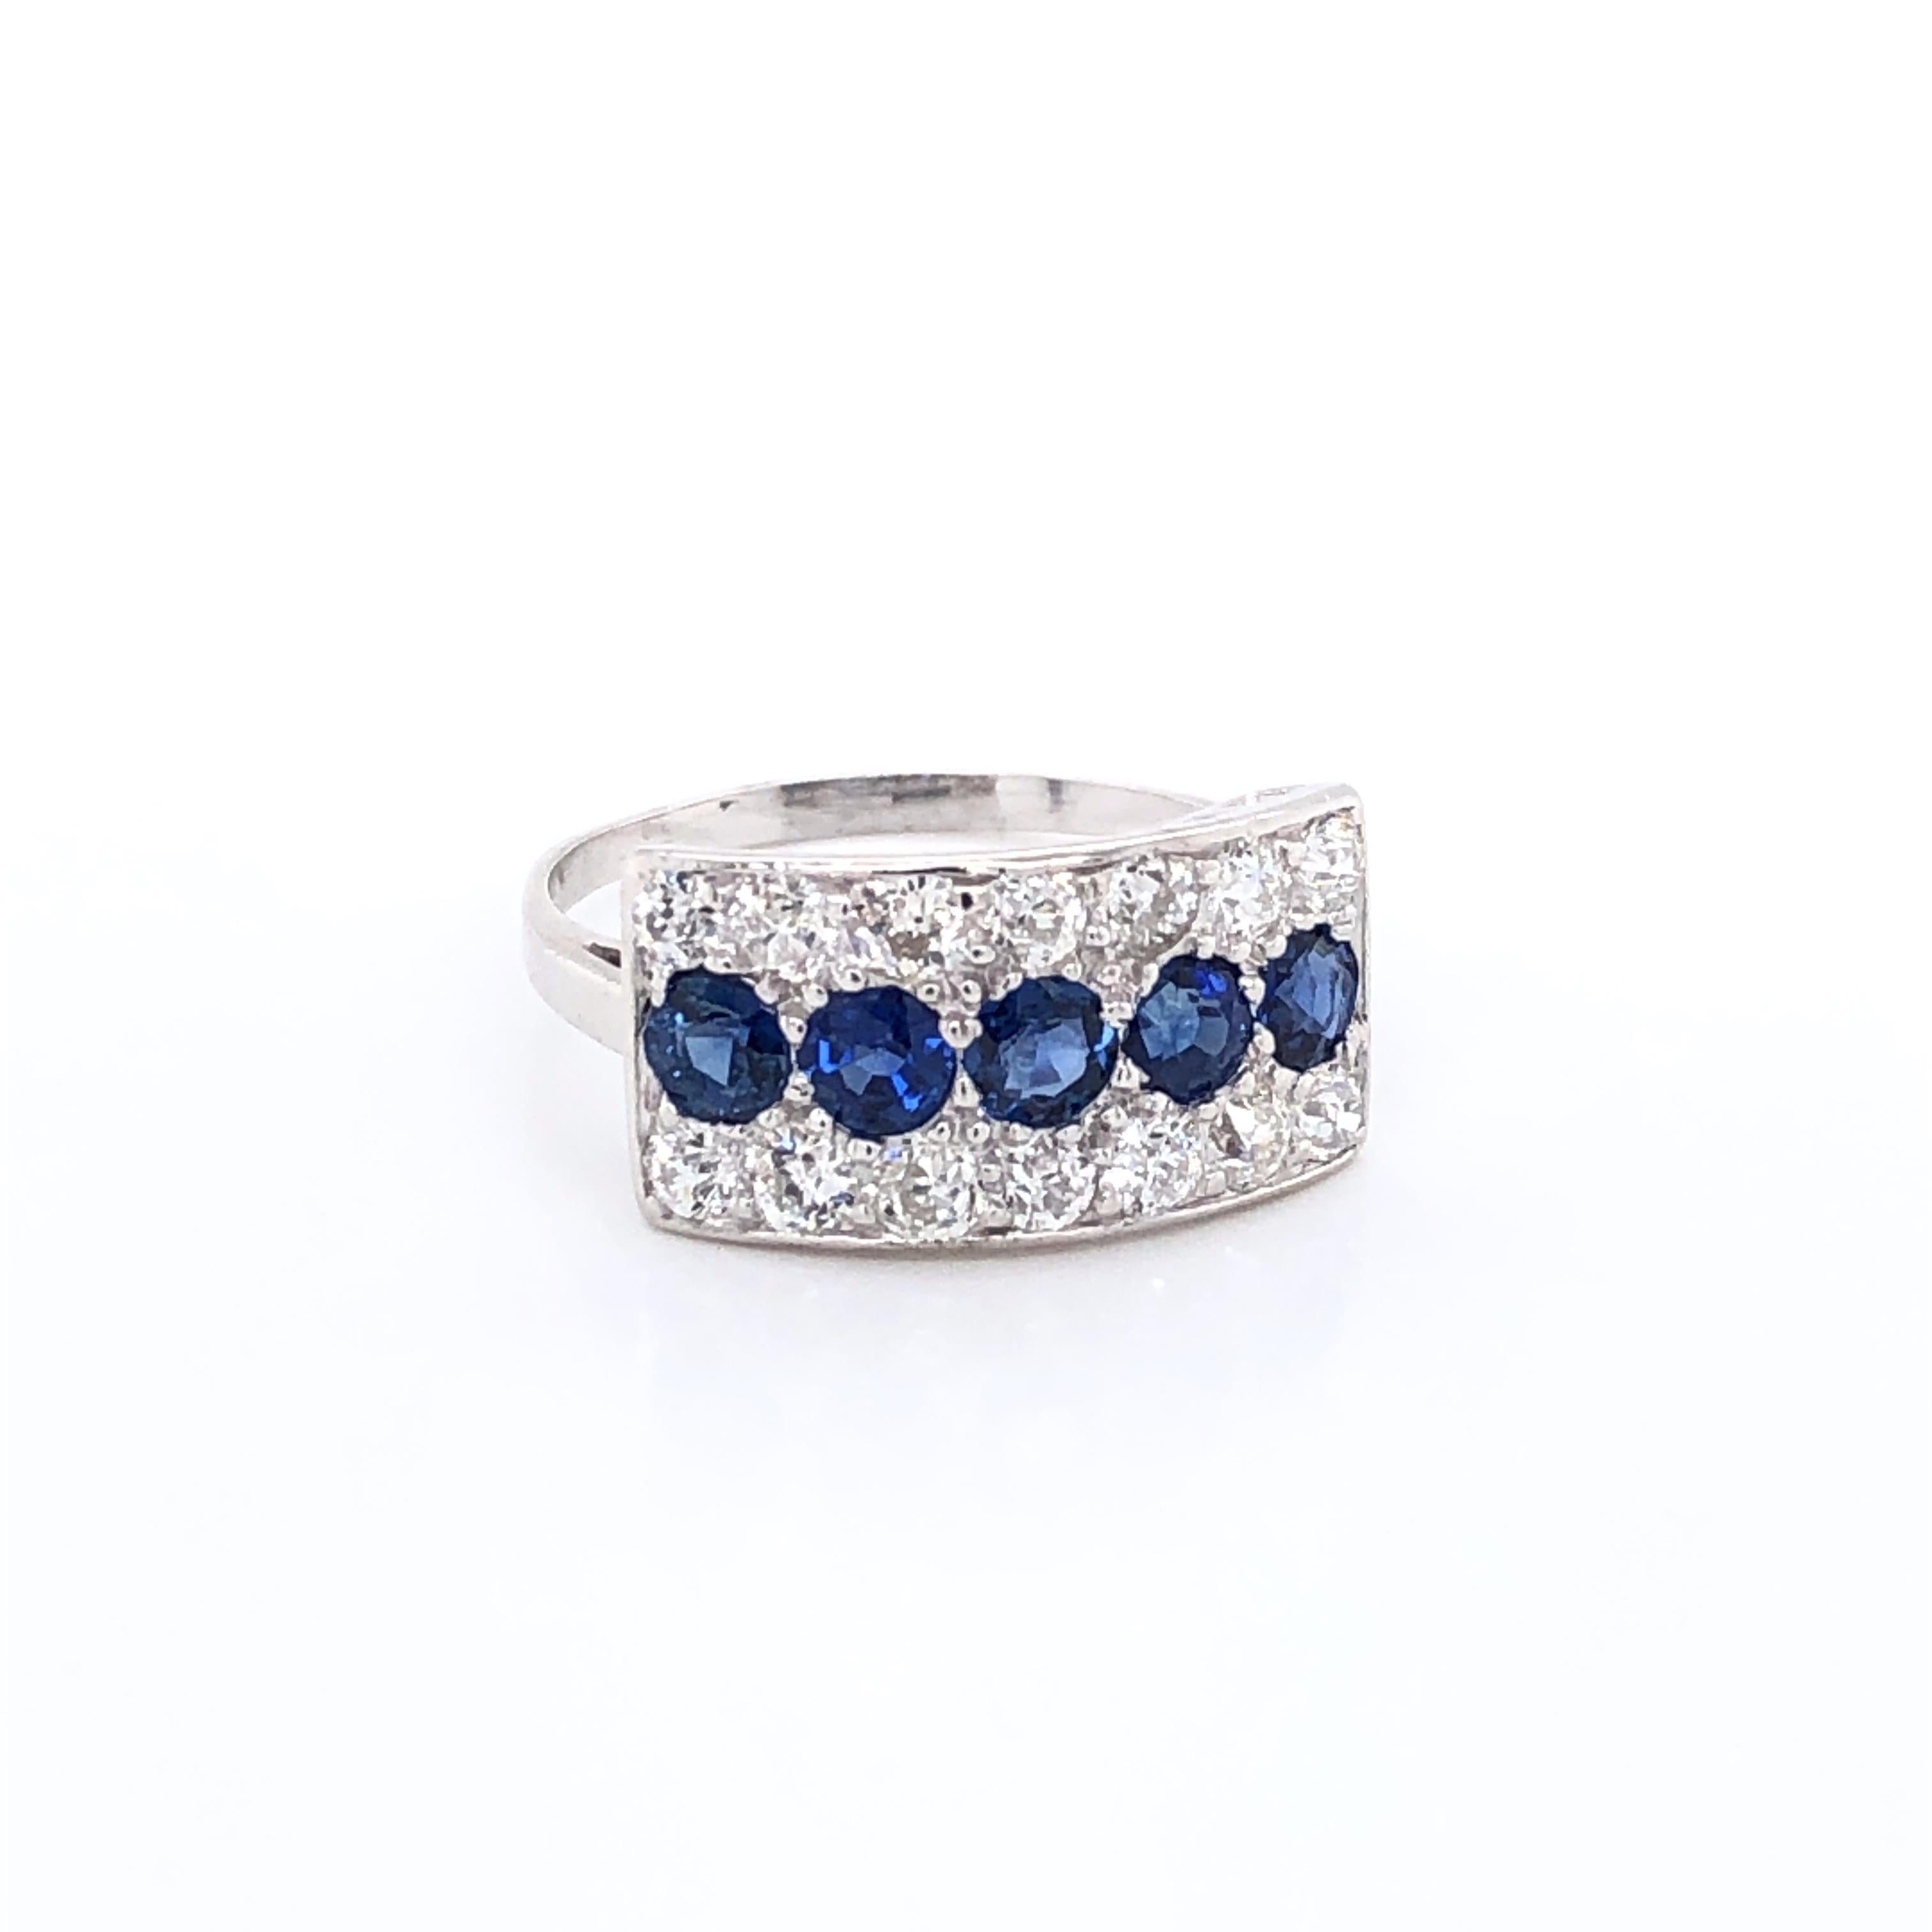 This dazzling antique diamond and sapphire ring will certainly get noticed for its unique rectangular raised platinum setting measuring 5/8